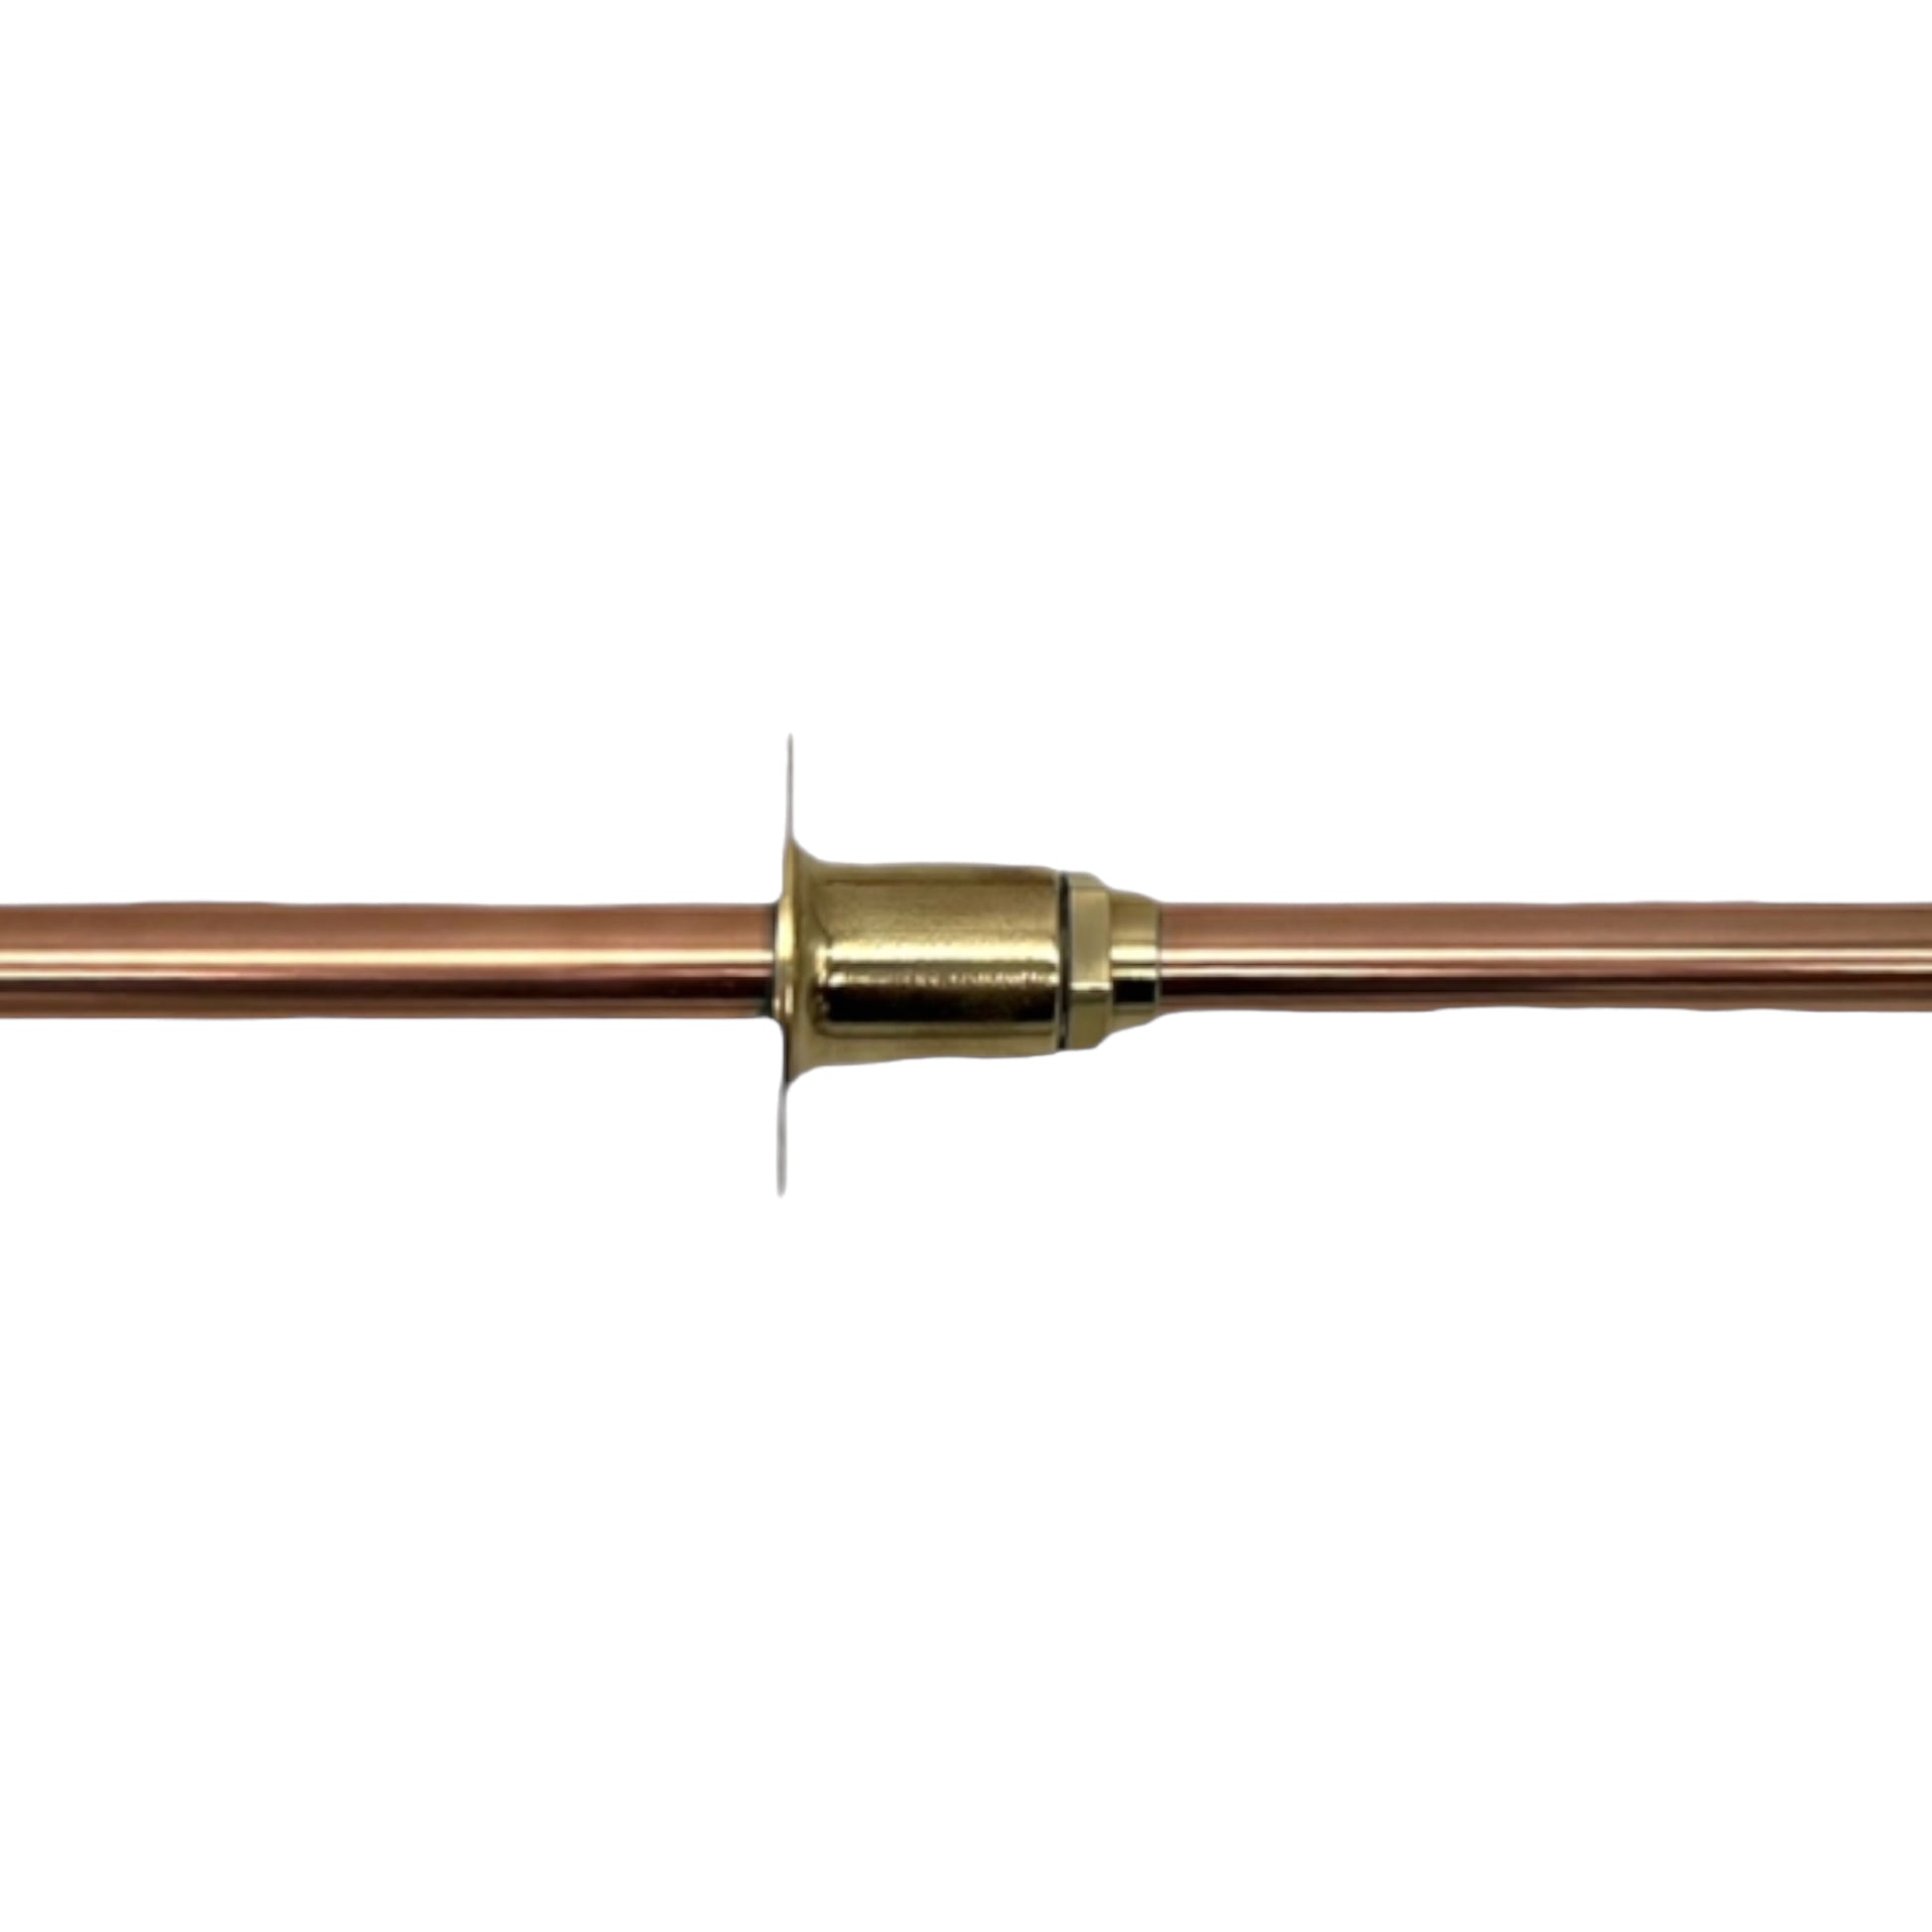 Copper and brass wall mounted kitchen or bathroom tap with 15mm tail ends sold by All Things French Store